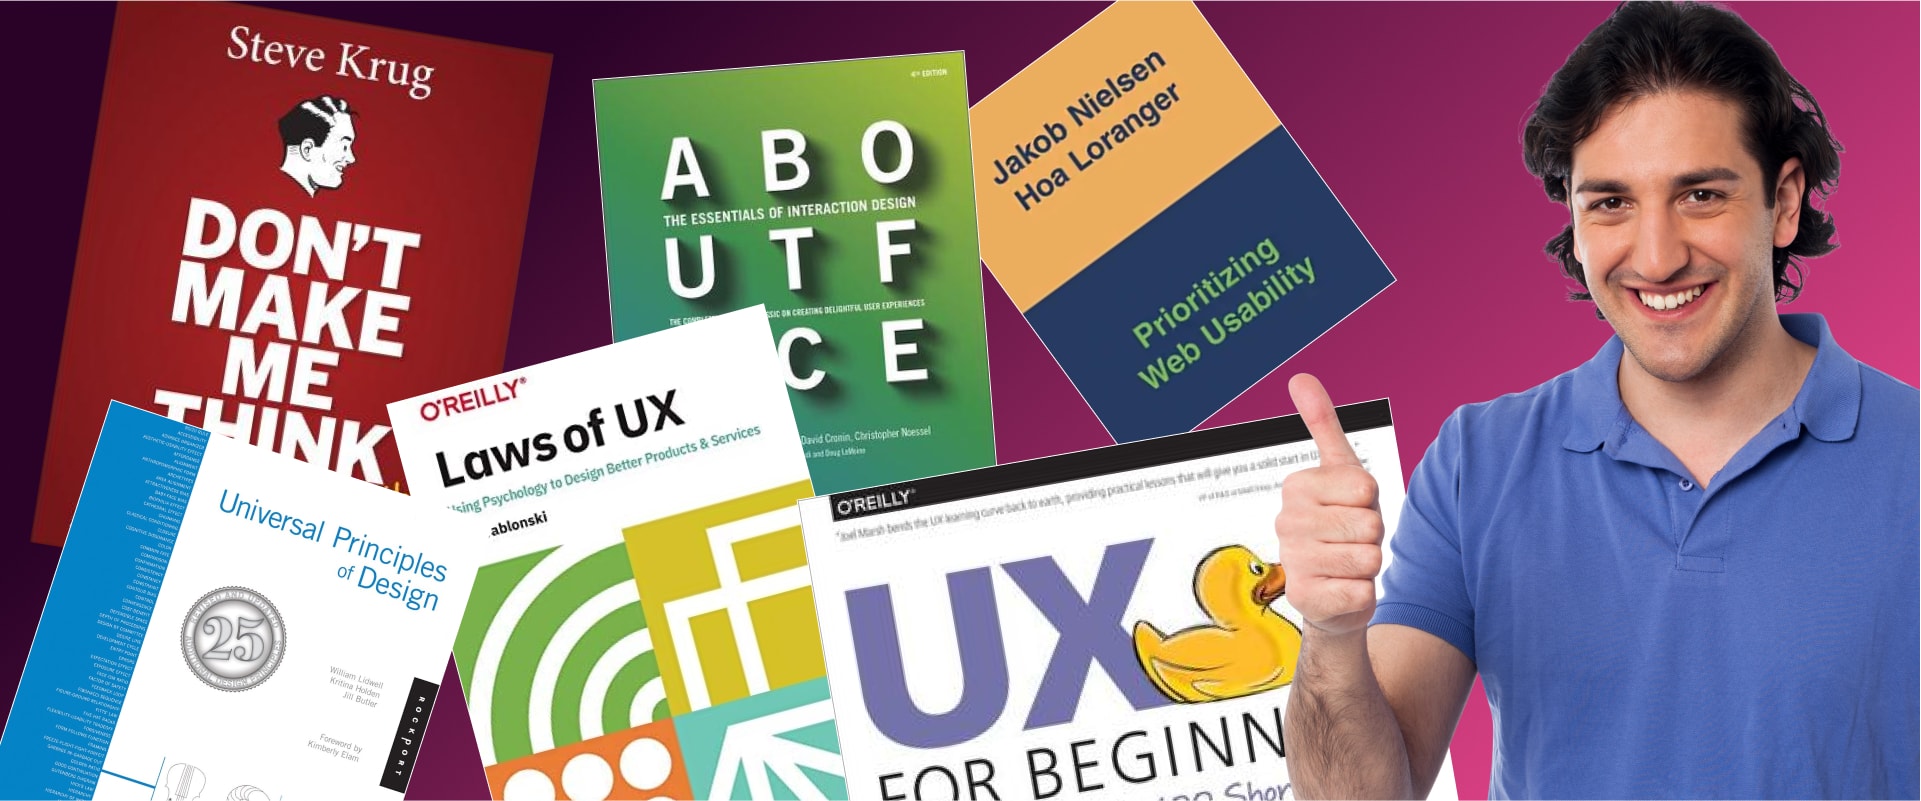 The Best UX Design and Marketing Books